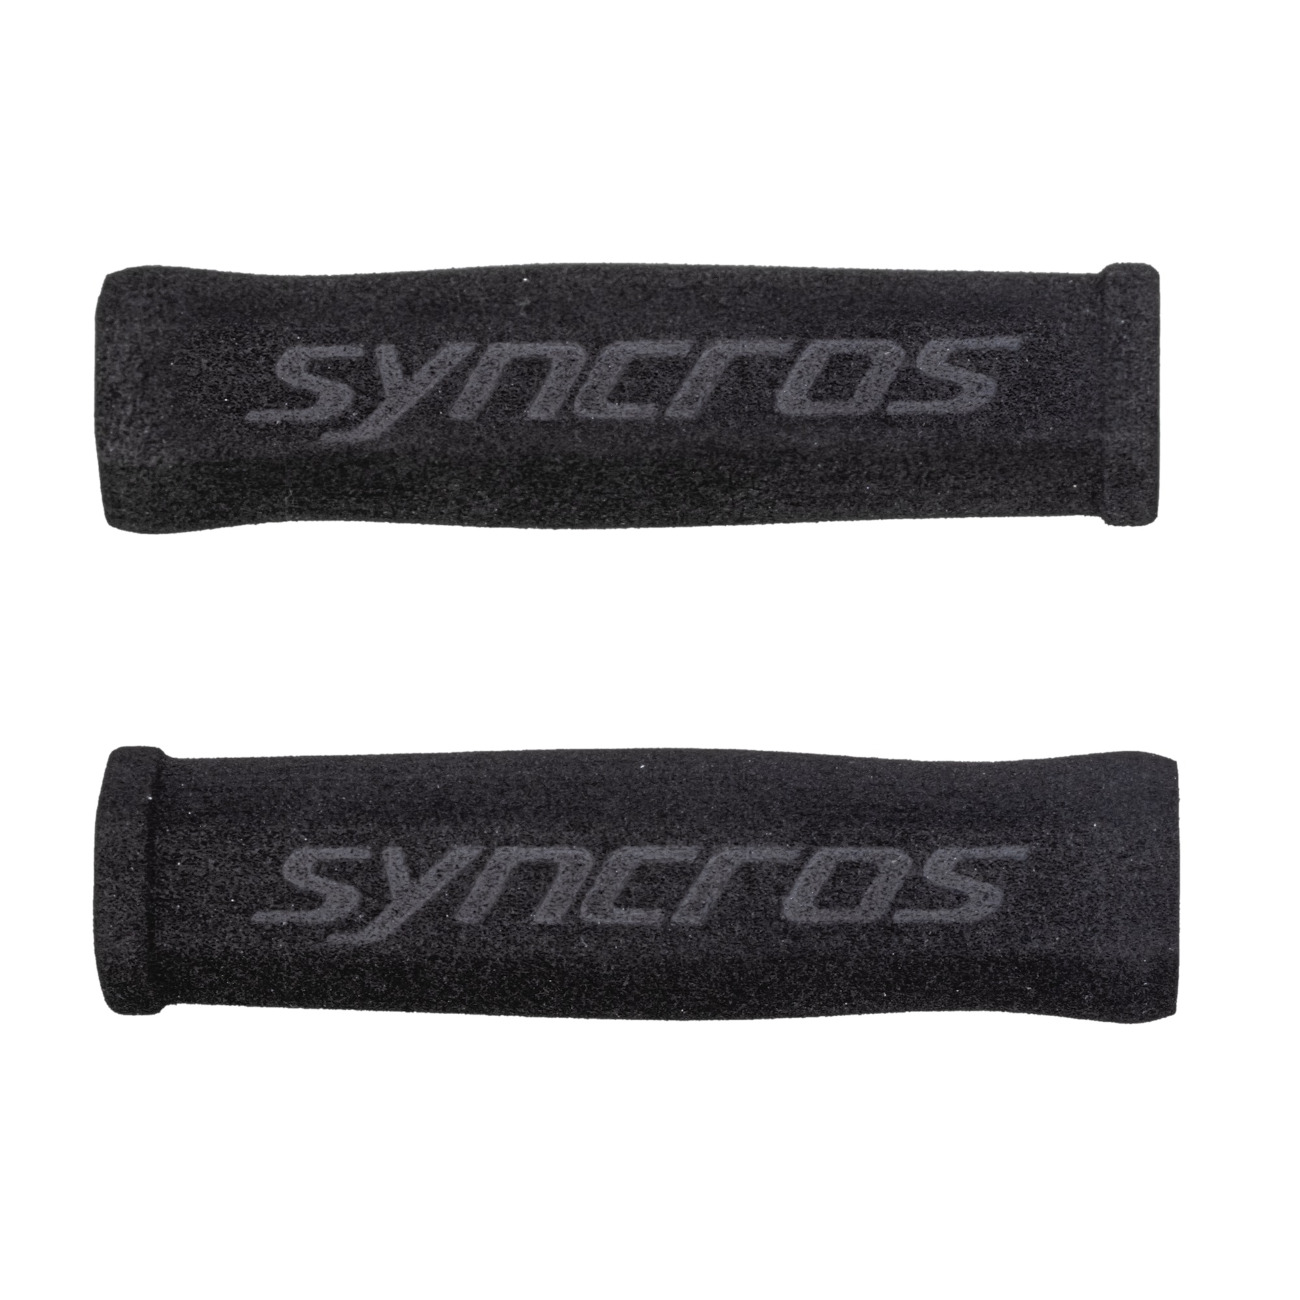 Picture of Syncros Foam Grips - black